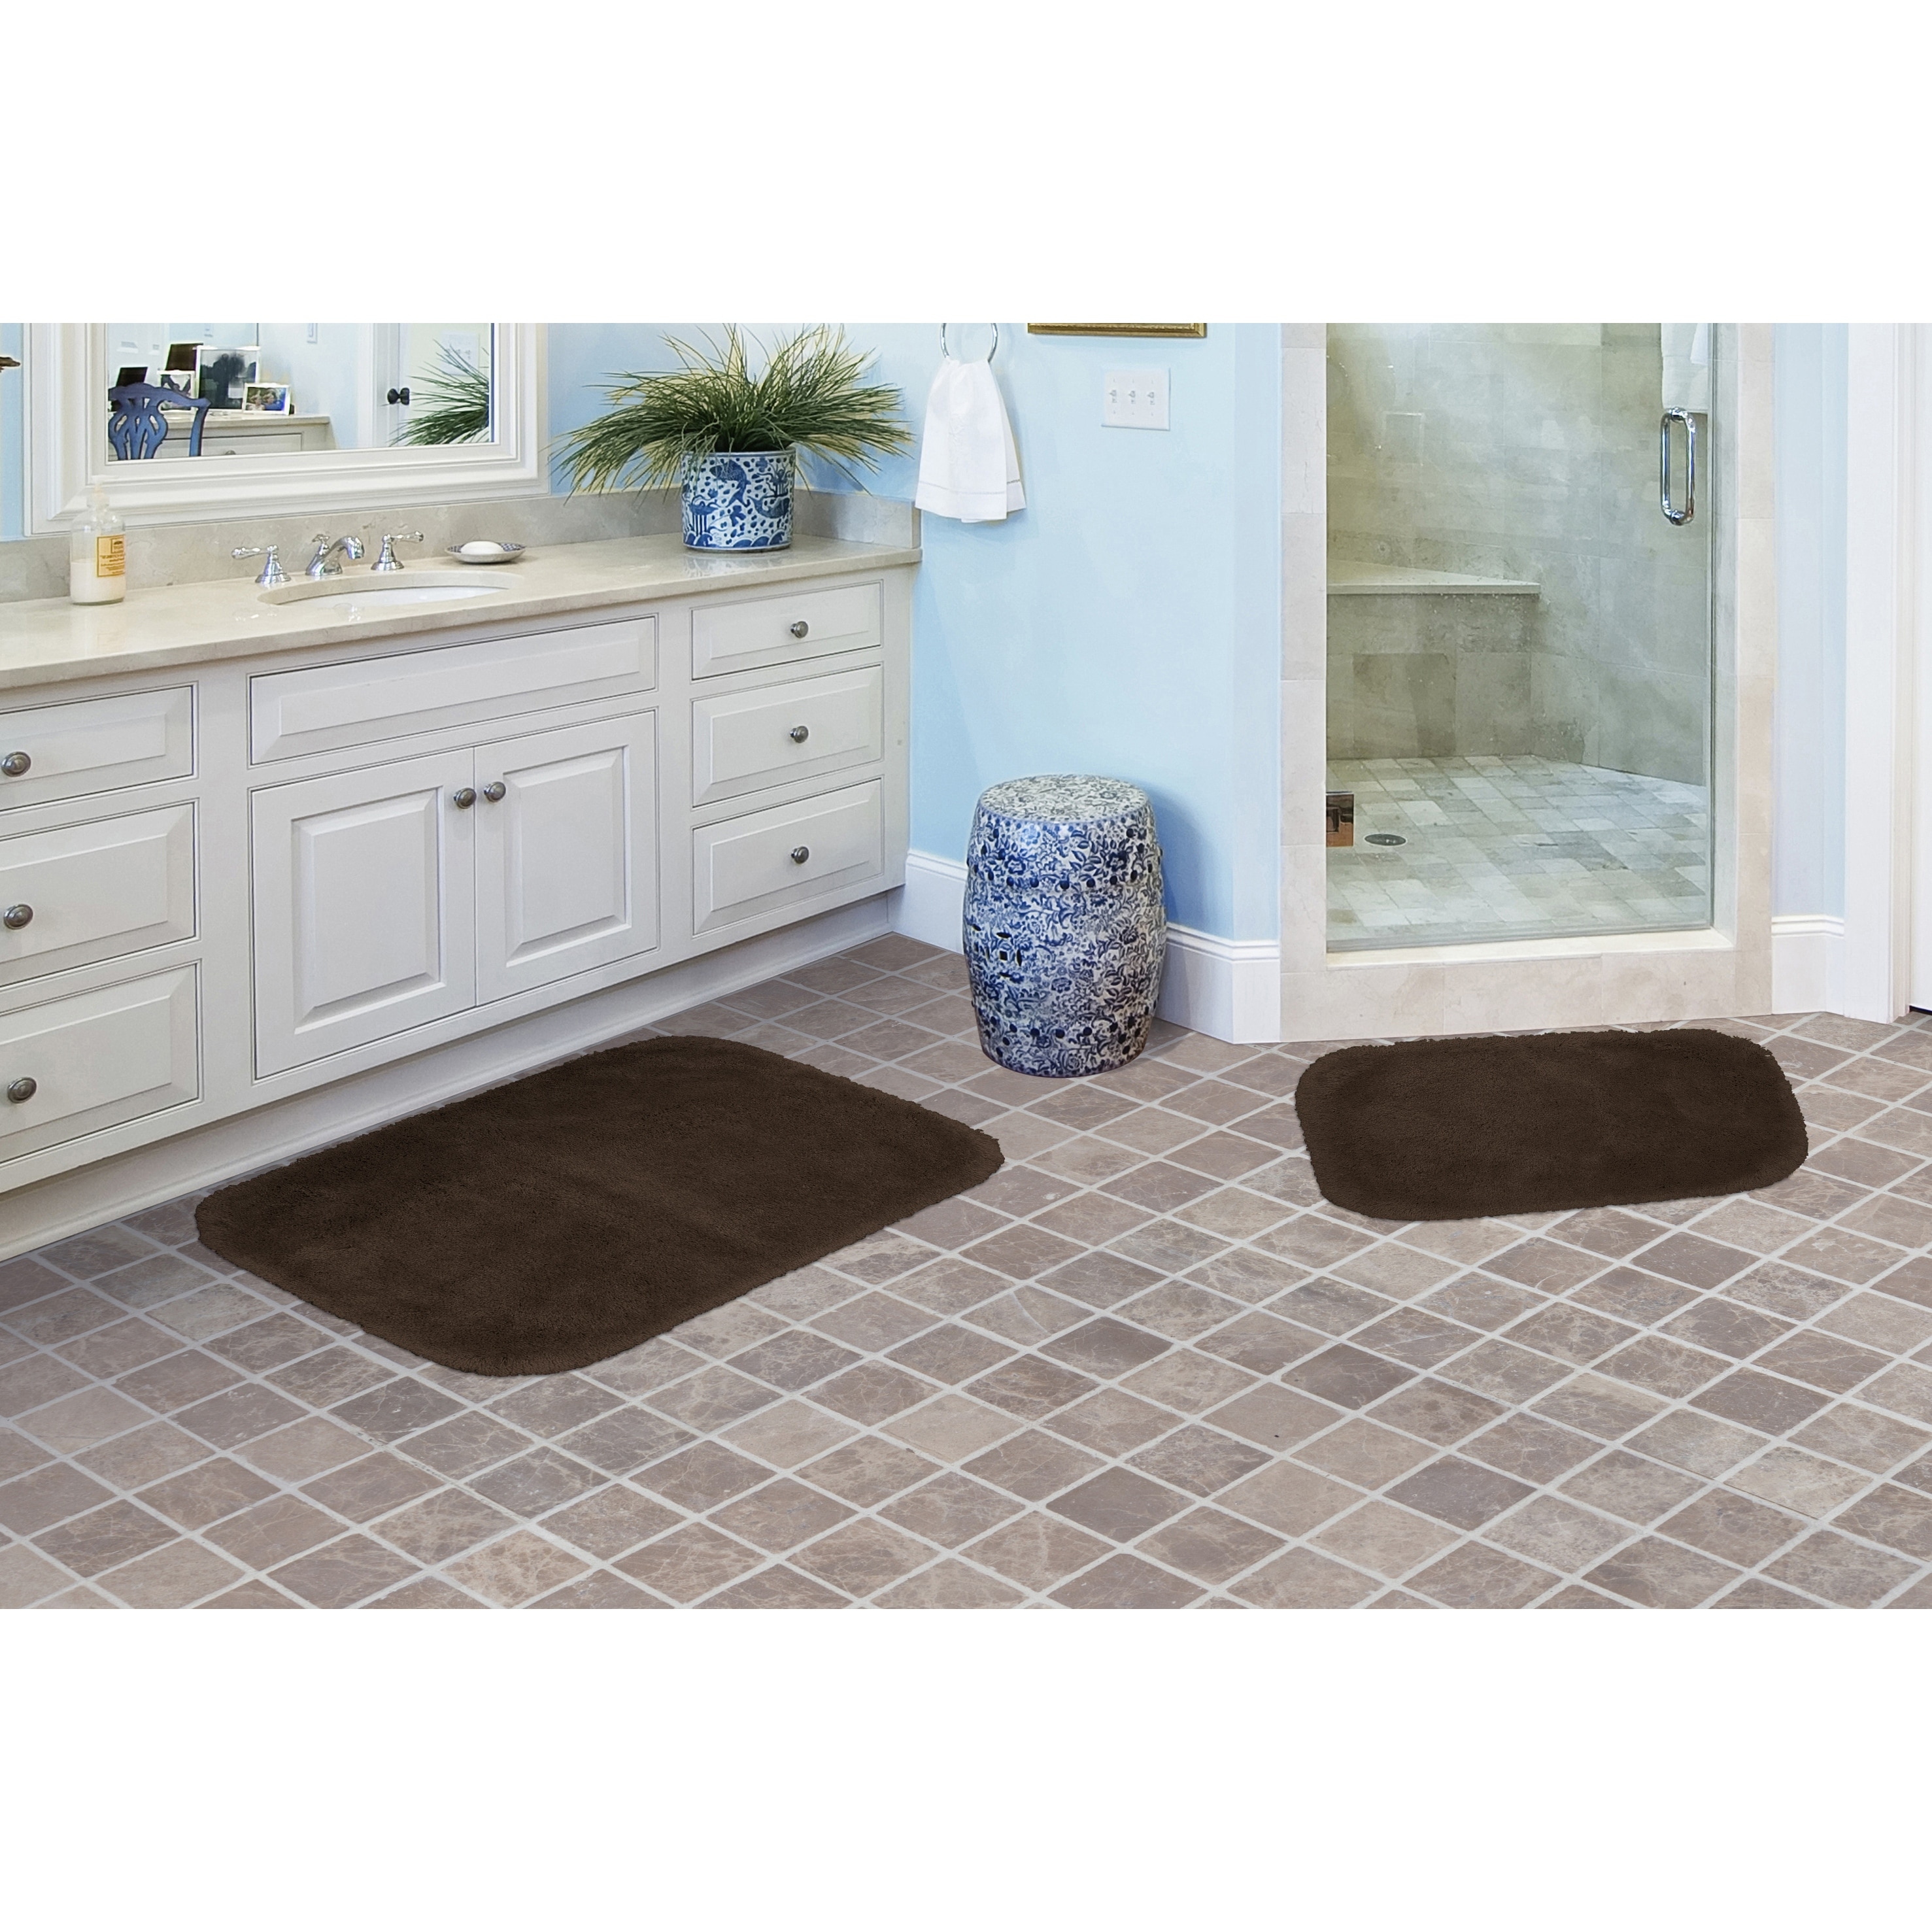 Mohawk Home Pure perfection 17-in x 24-in Turquoise Nylon Bath Rug in the Bathroom  Rugs & Mats department at